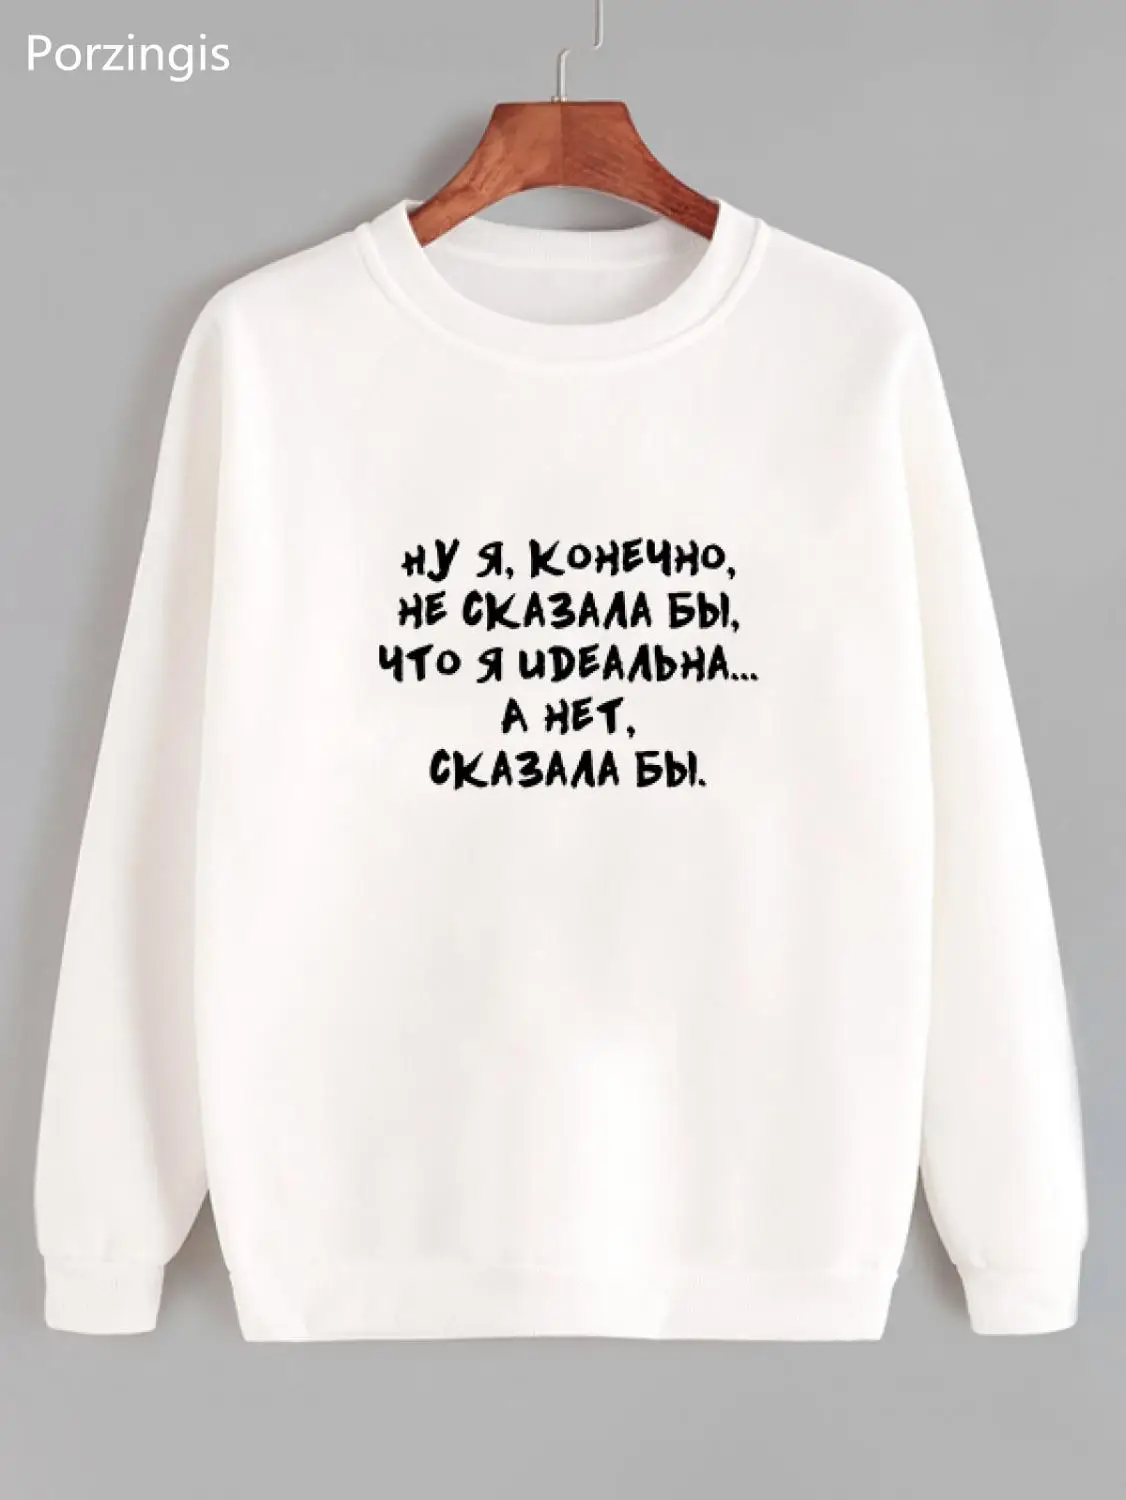  Porzingis Women's Sweatshirts With Russian Inscriptions I Would Not Say That I Am Perfect Winter Ne